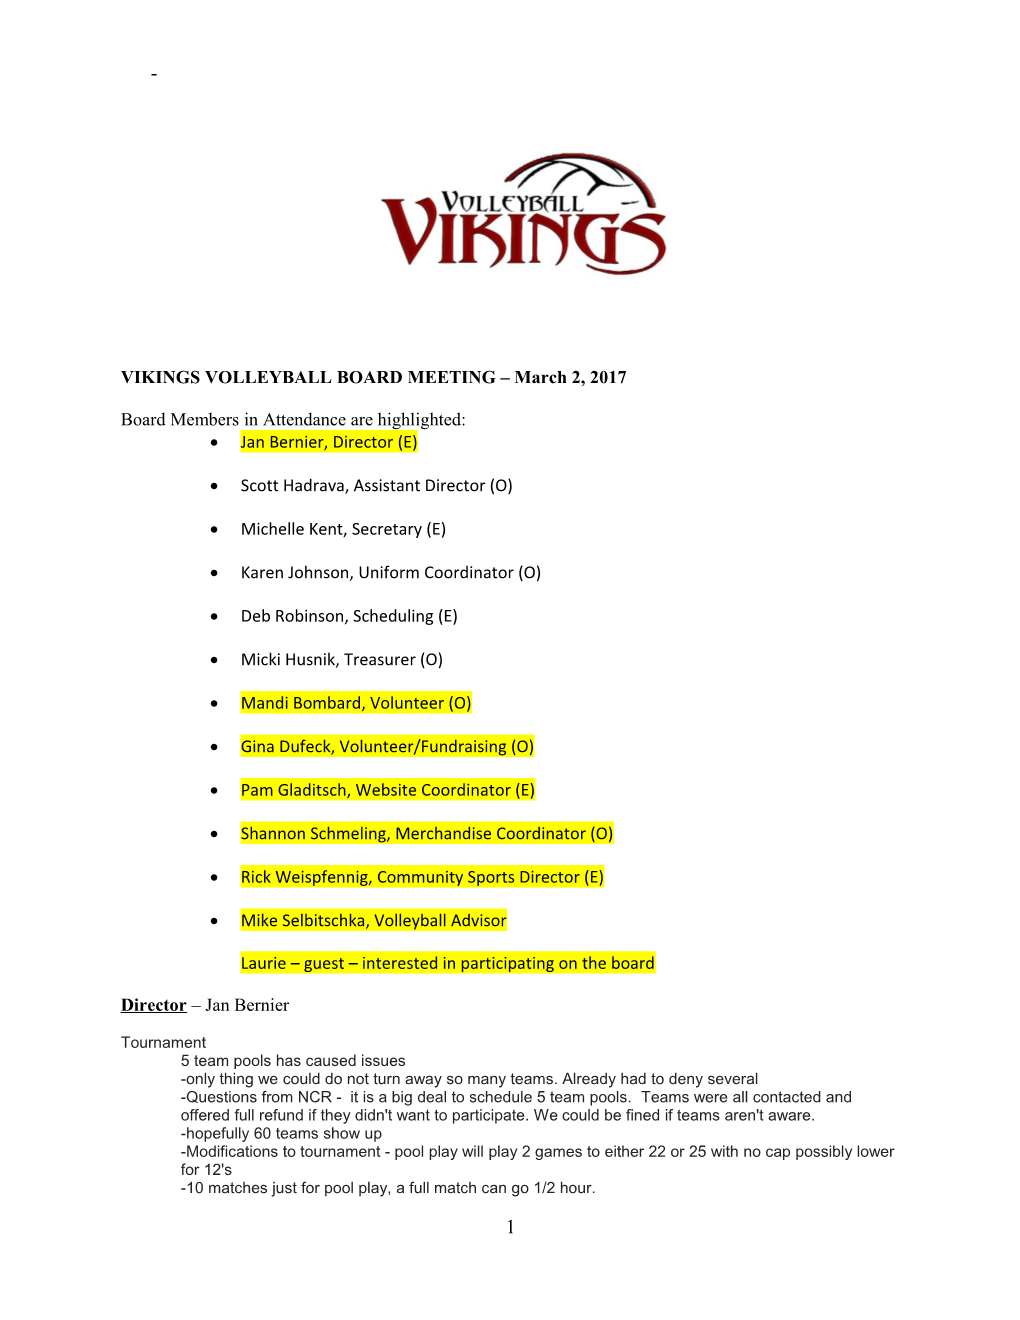 VIKINGS VOLLEYBALL BOARD MEETING March 2, 2017